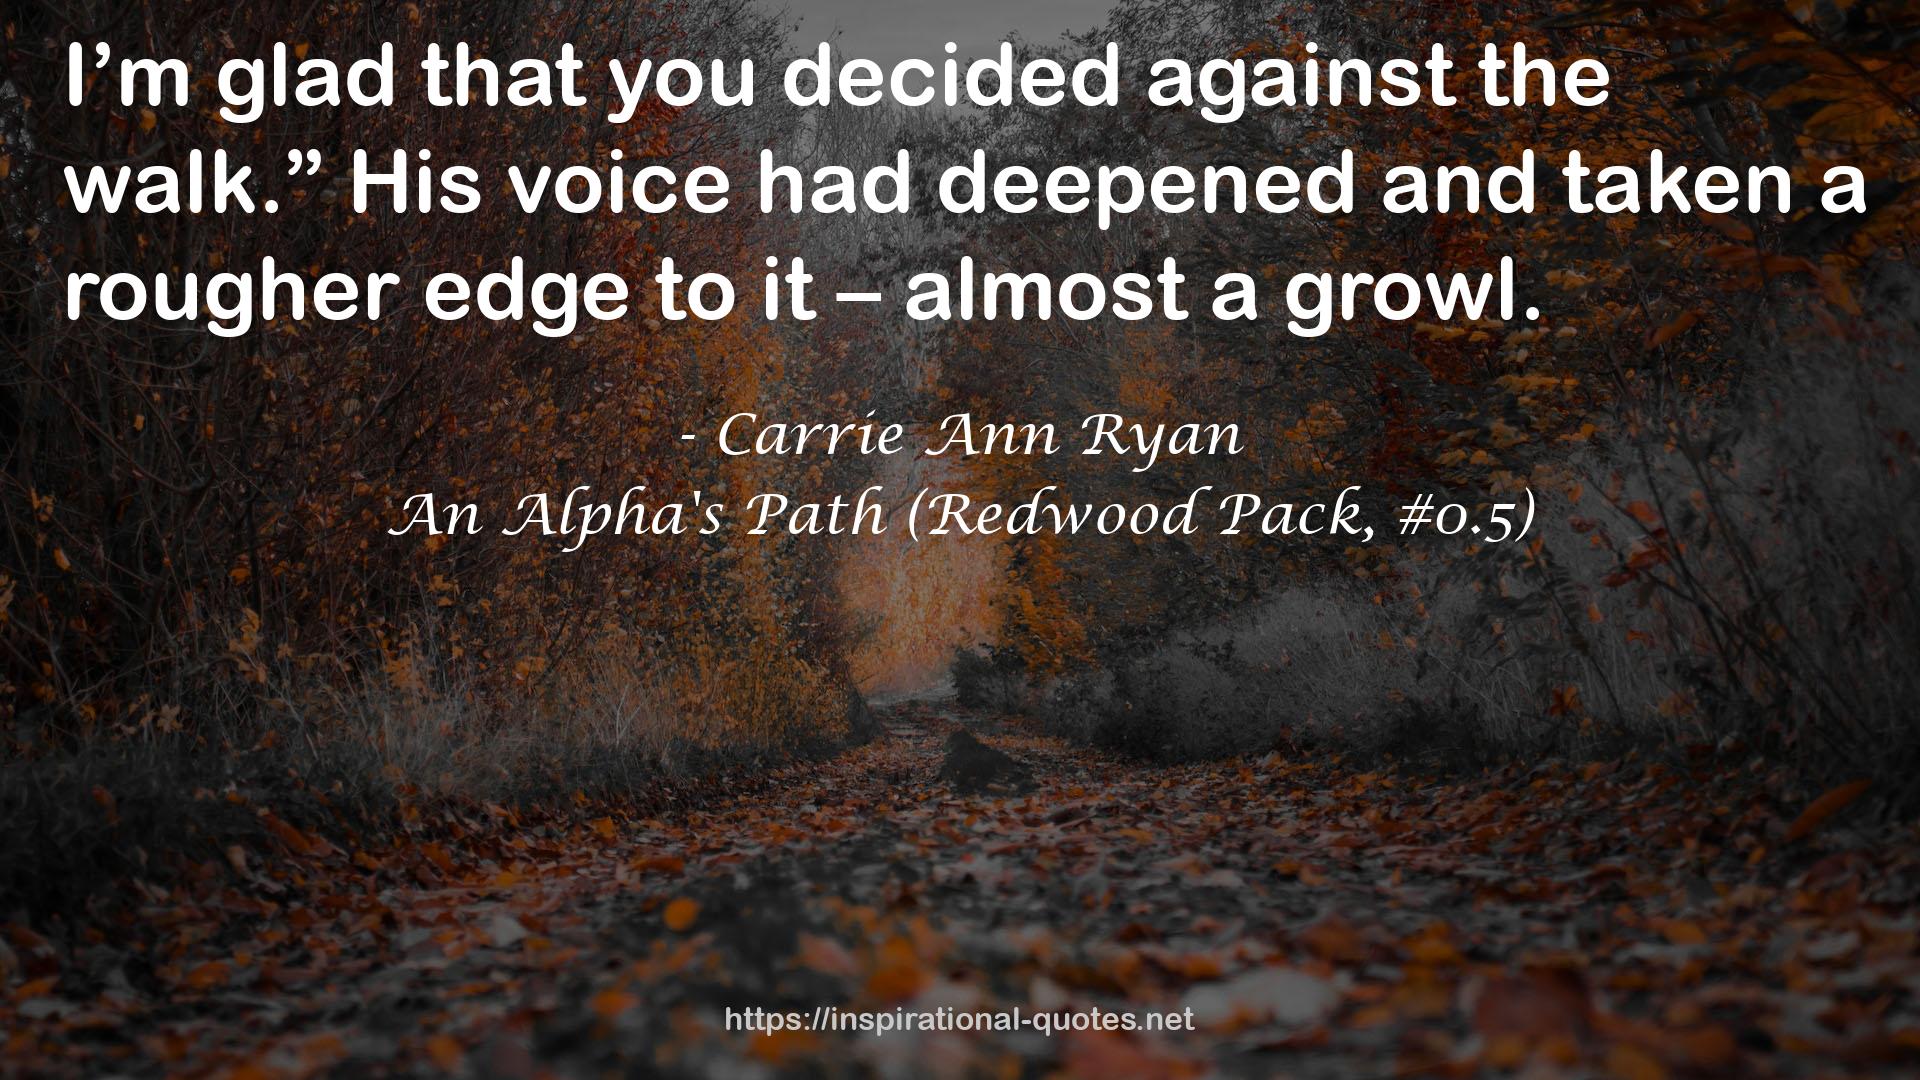 An Alpha's Path (Redwood Pack, #0.5) QUOTES